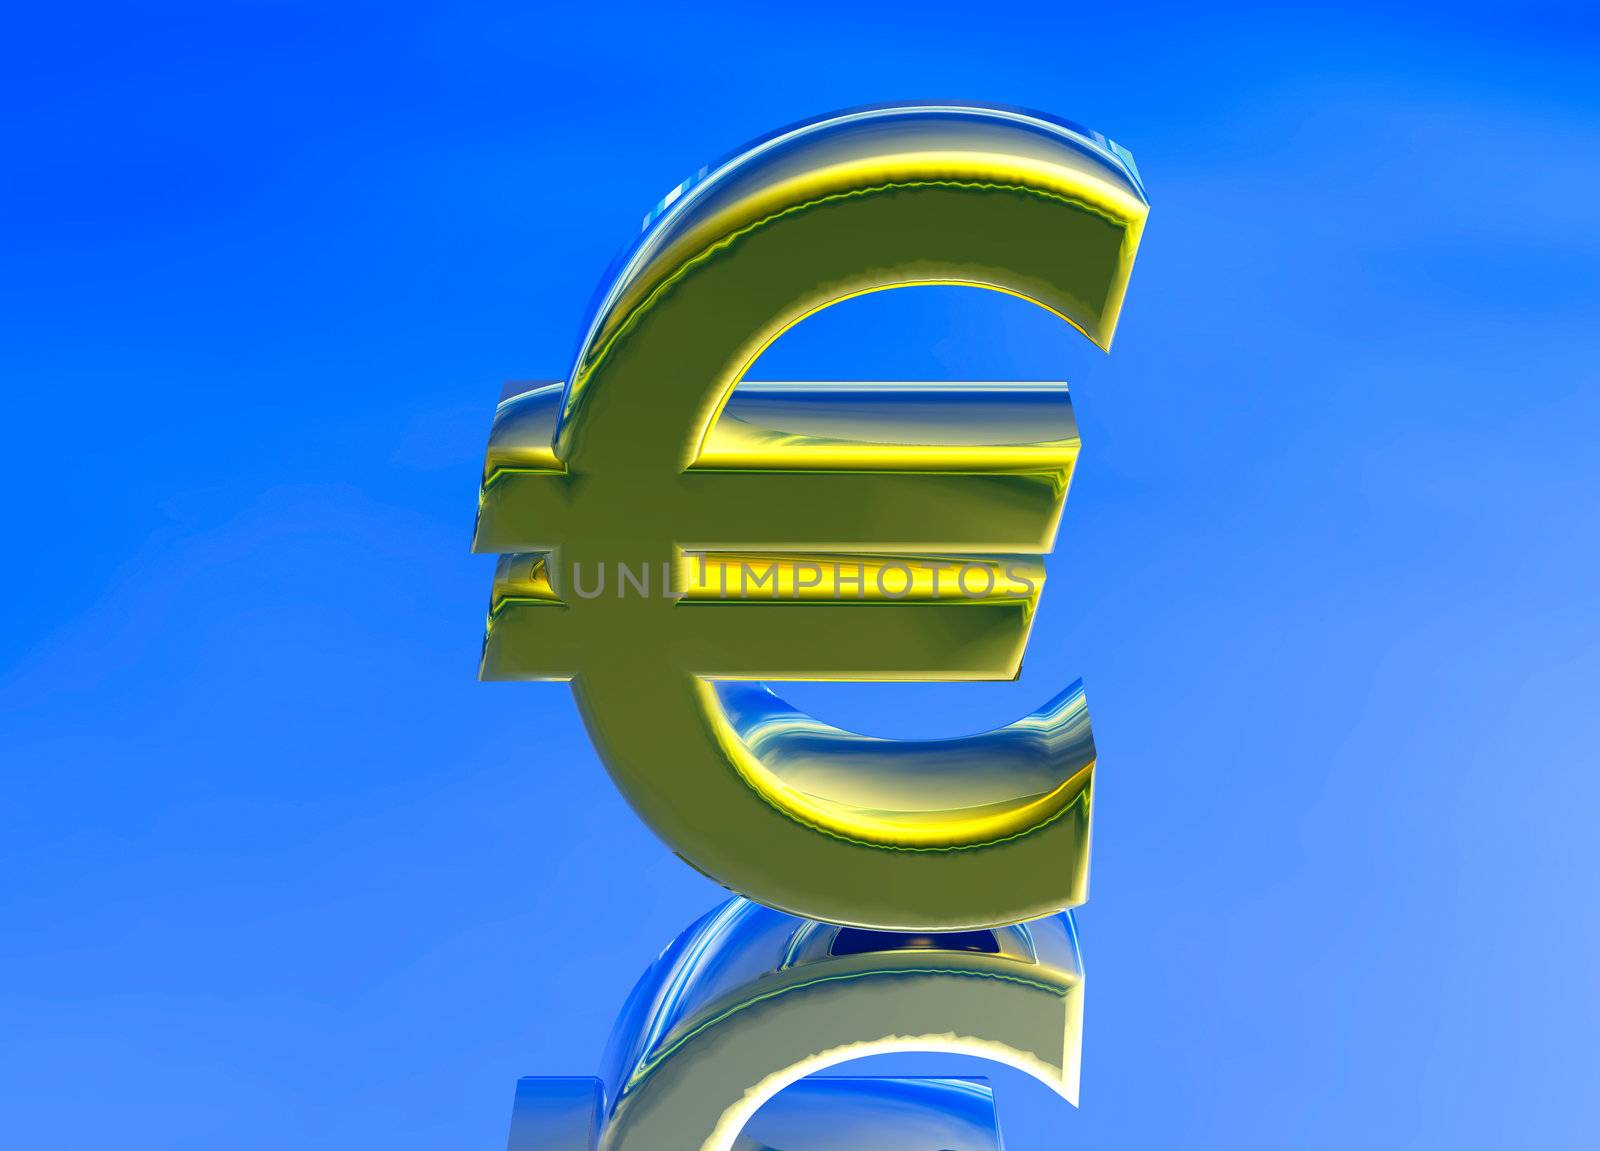 Gold EU Euro Currency Symbol on Blue Background